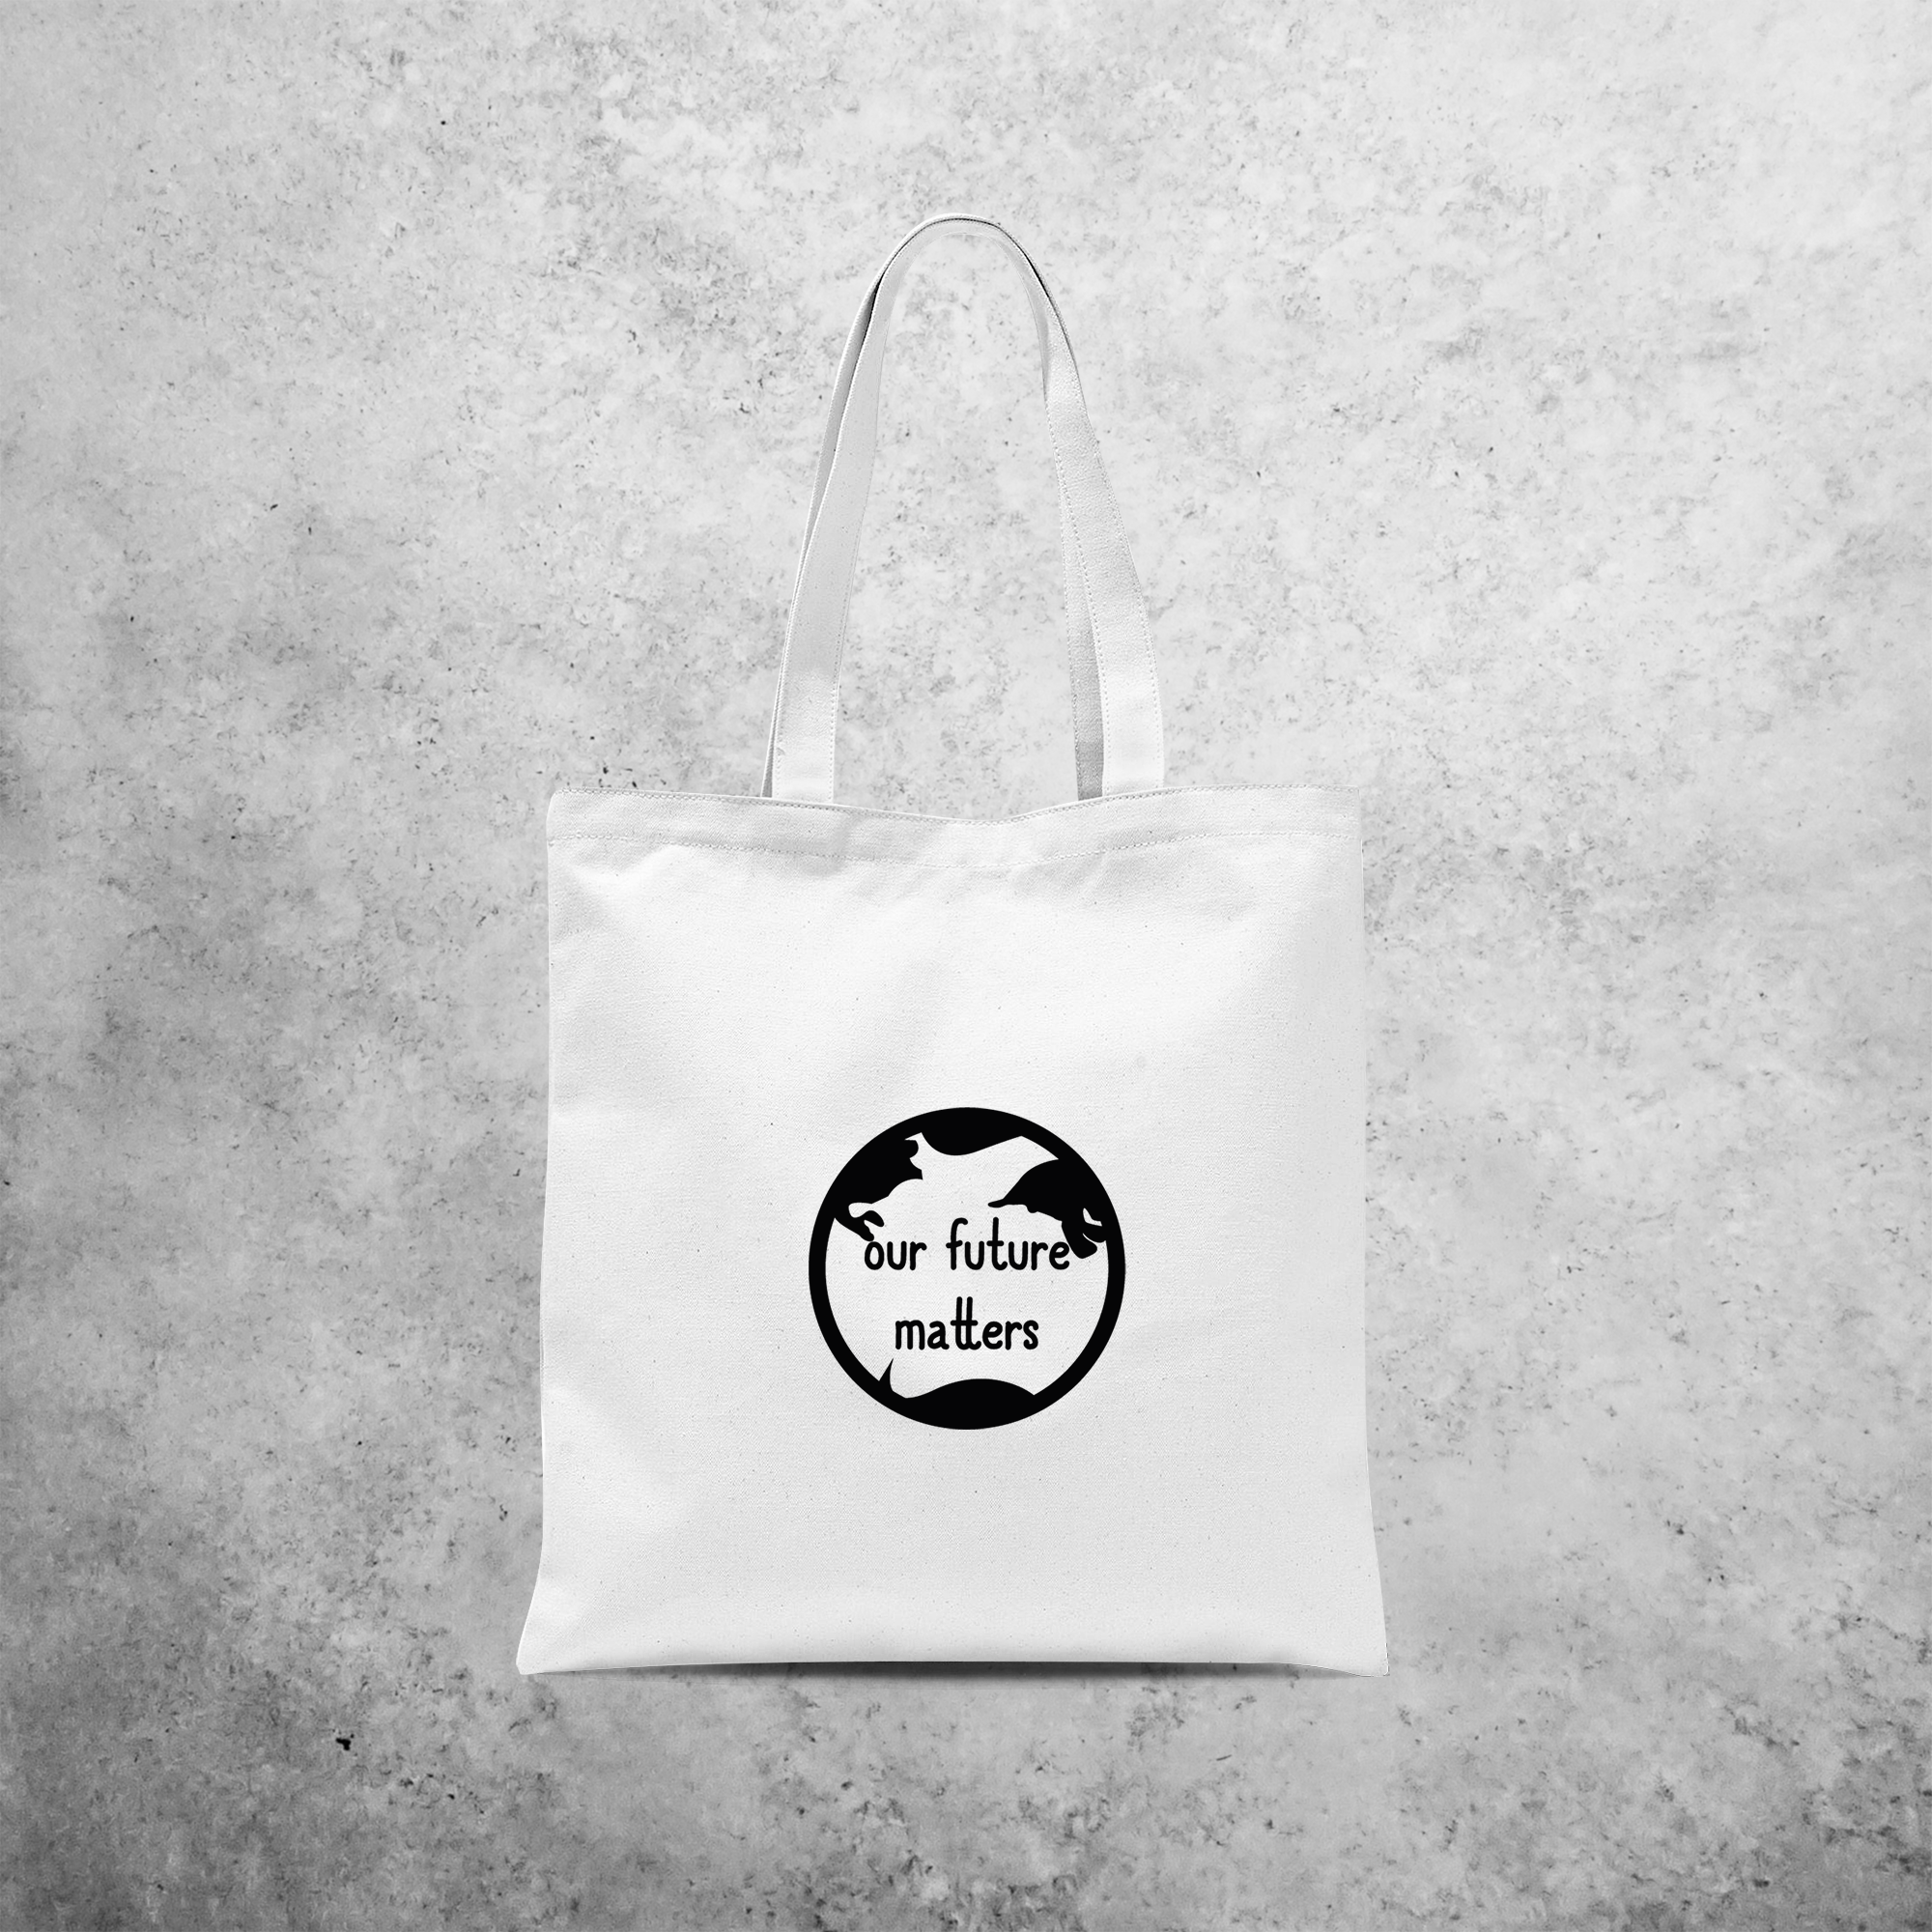 'Our future matters' tote bag